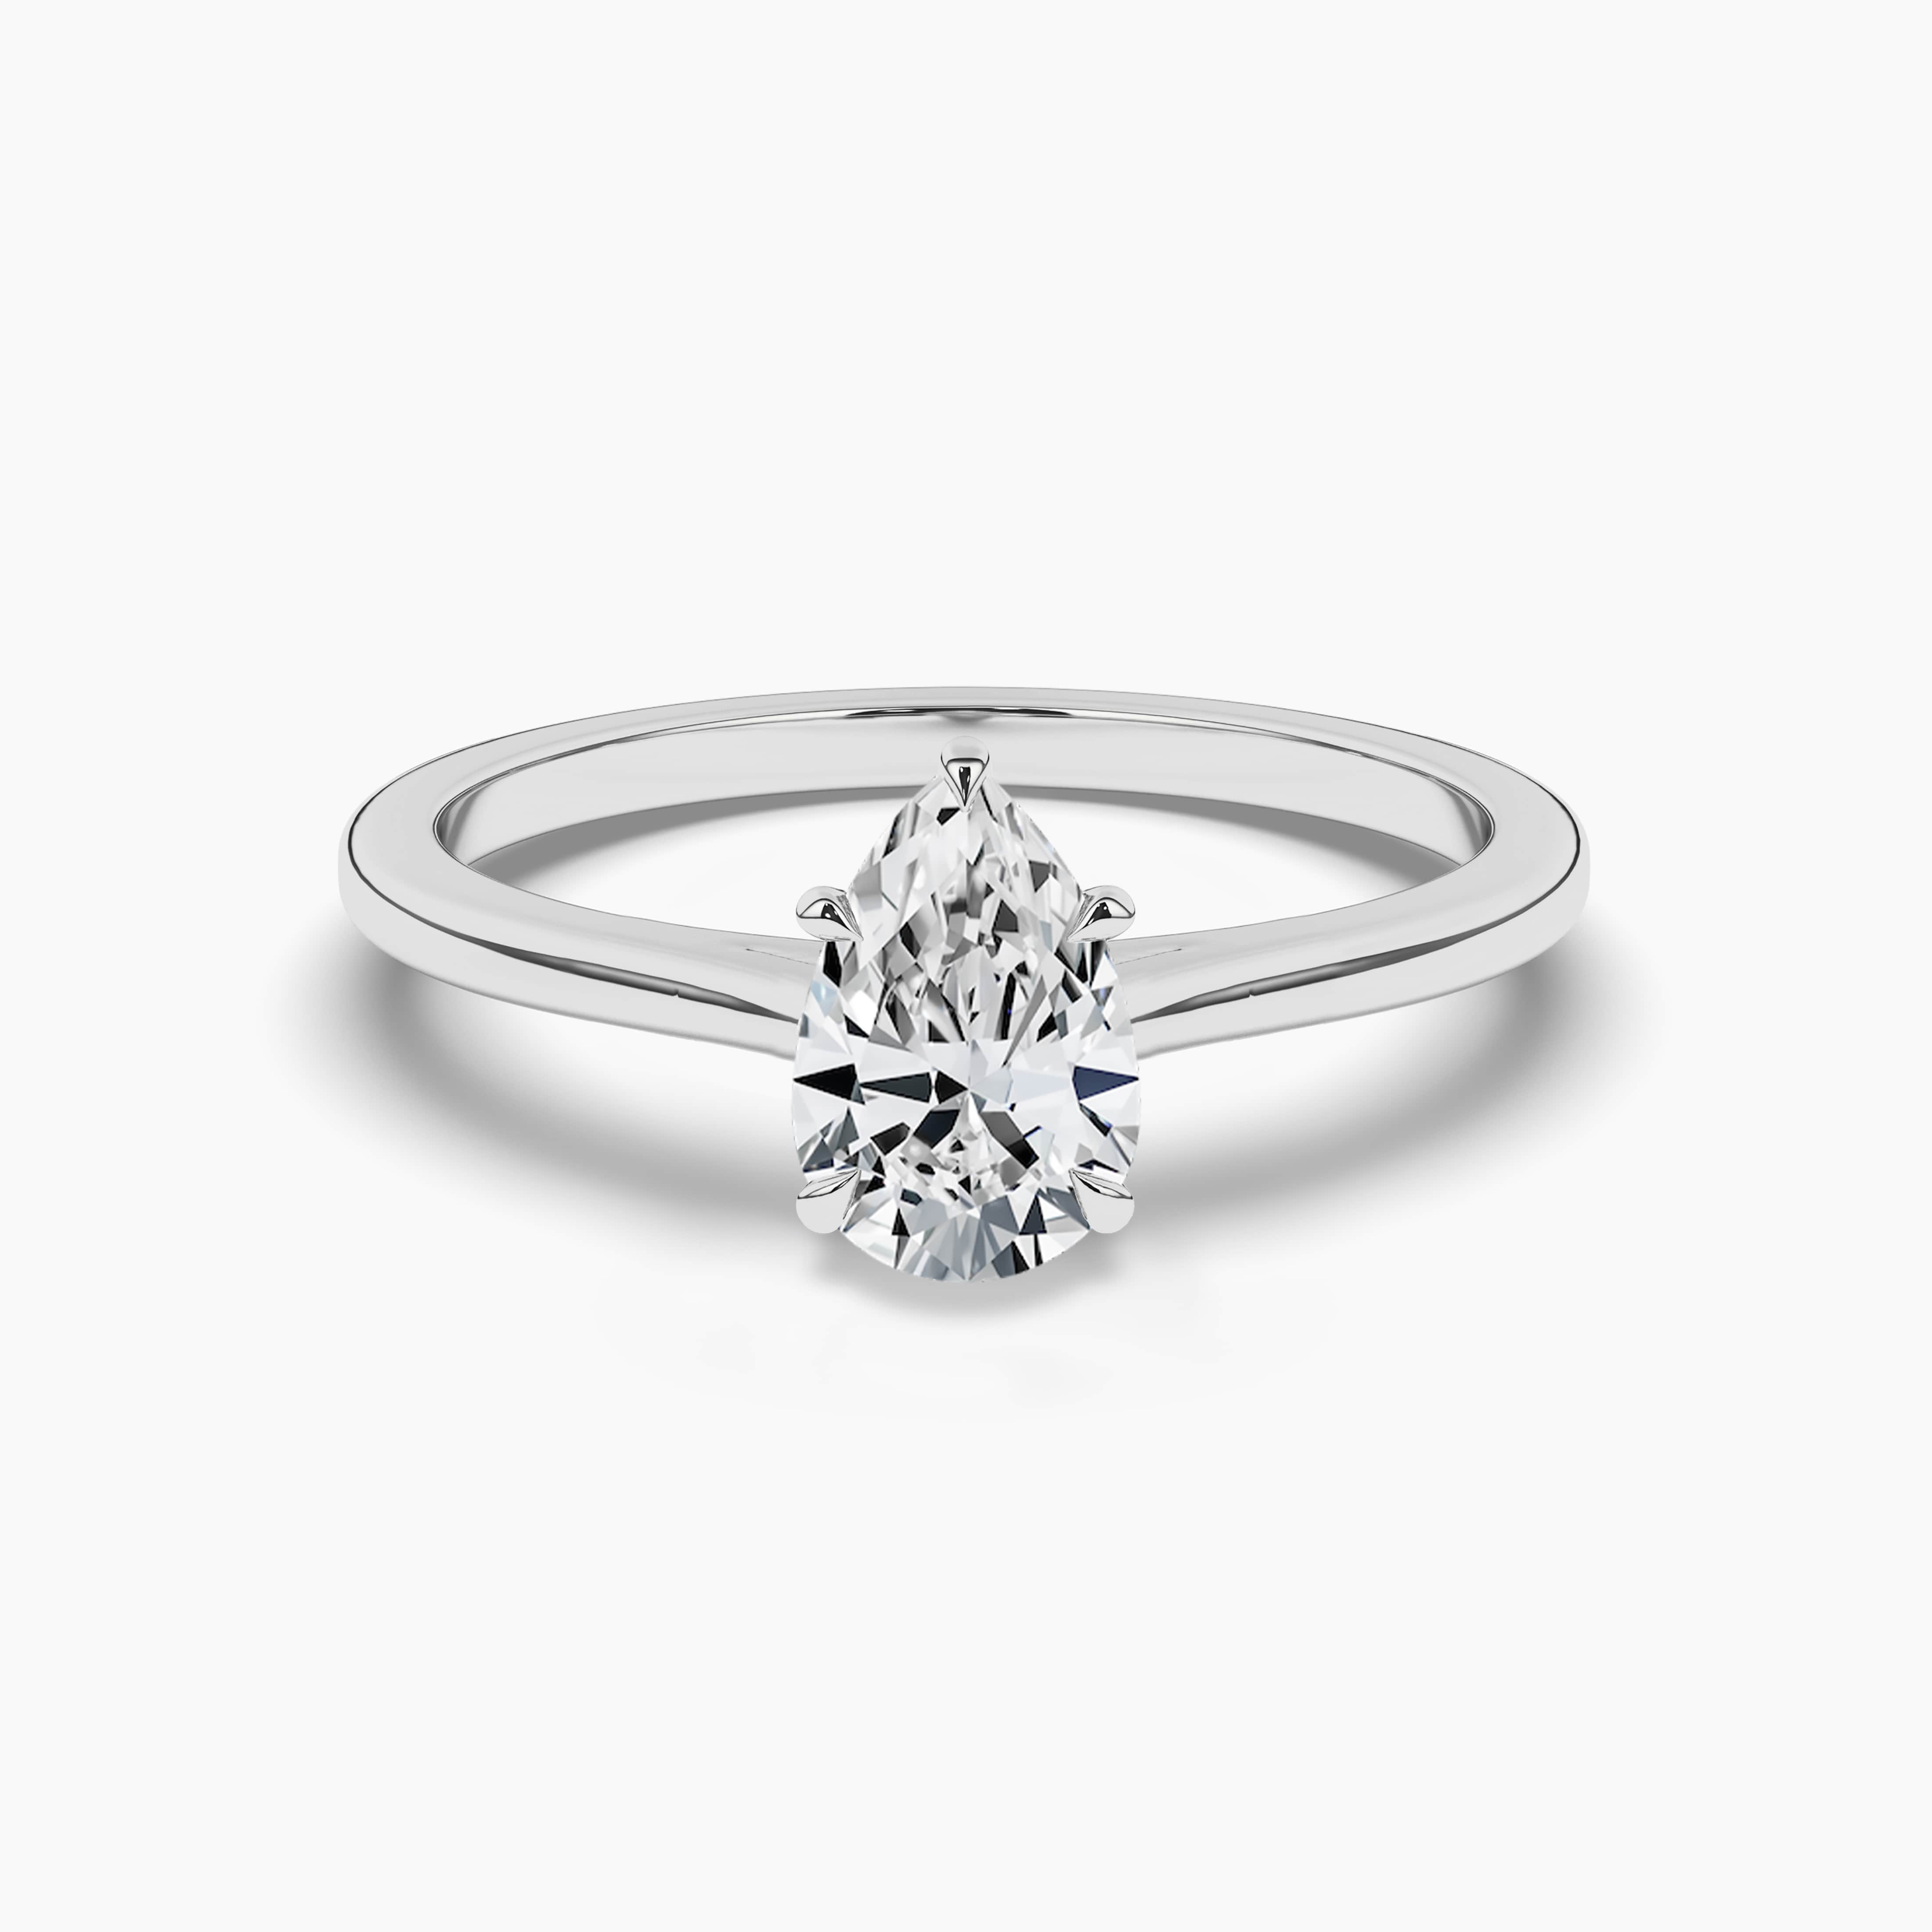 Pear Shaped Engagement Ring, Solitaire Engagement